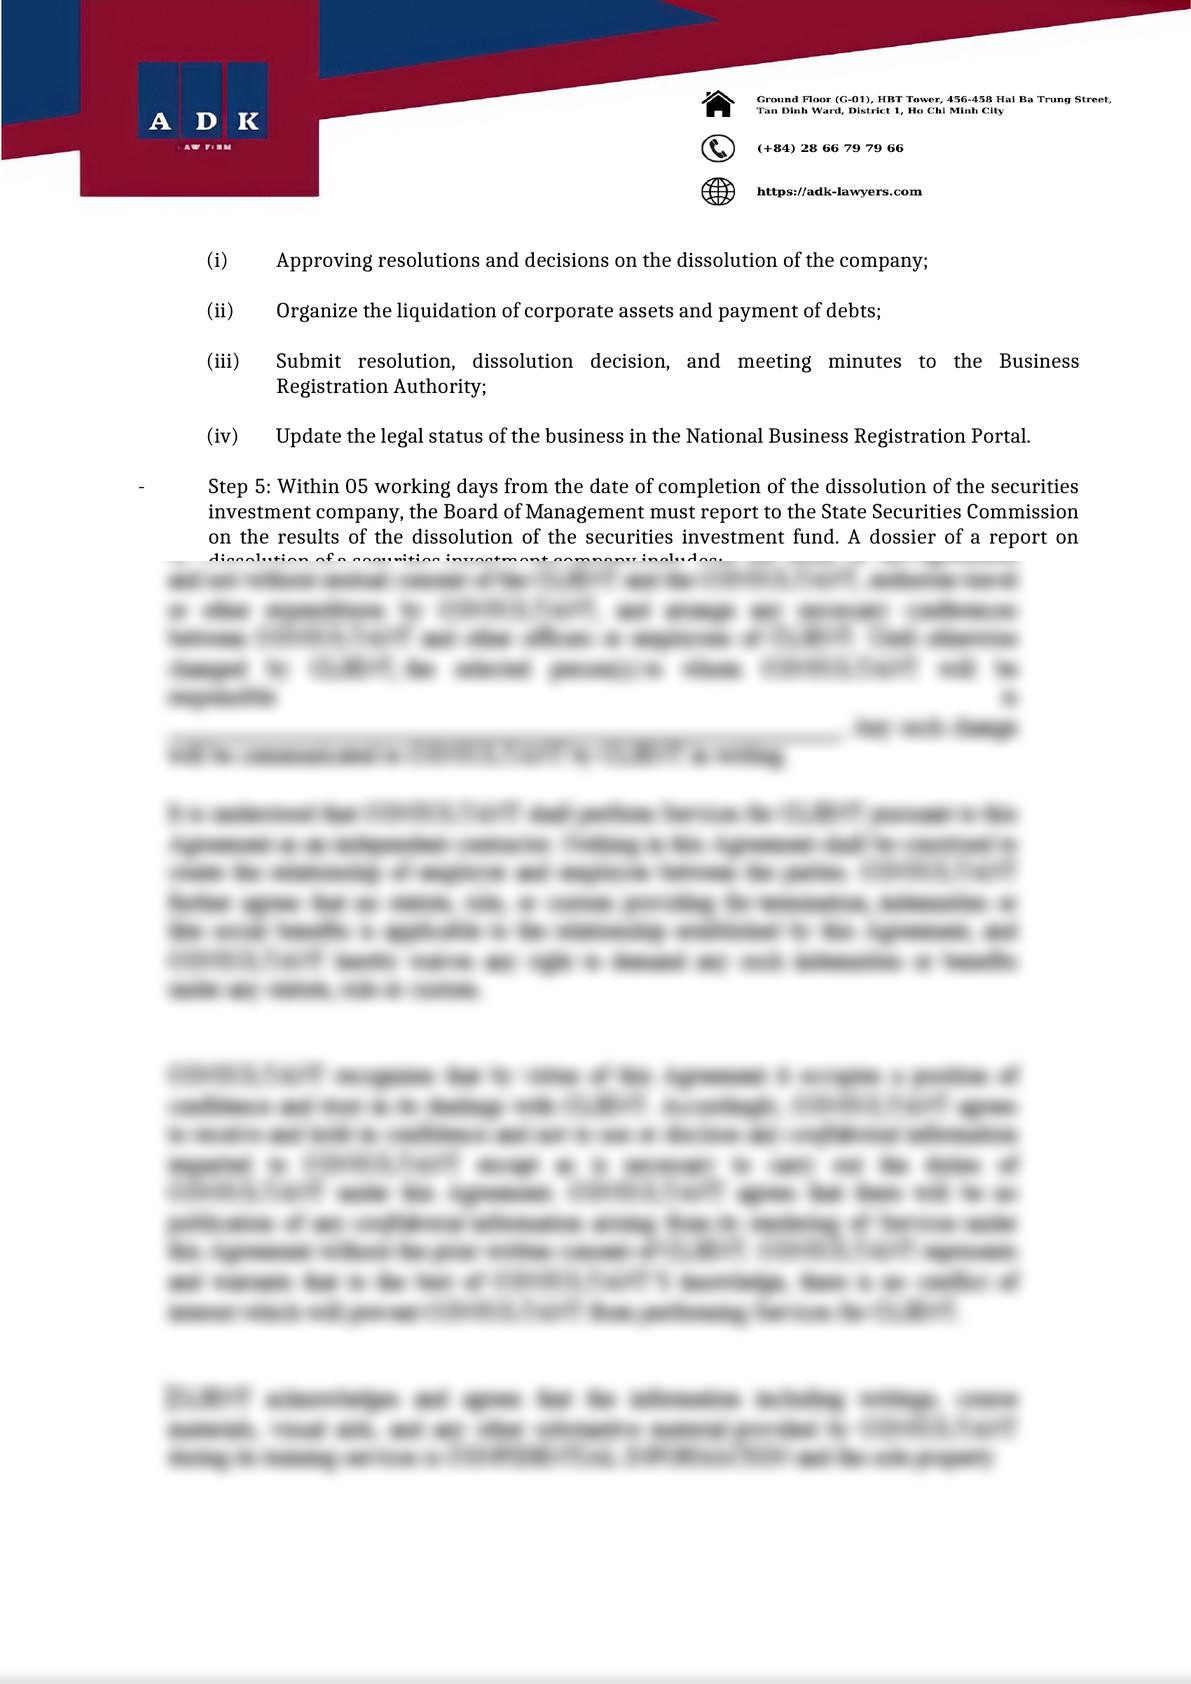 PROCEDURES FOR DISSOLUTION OF SECURITIES INVESTMENT COMPANY-2